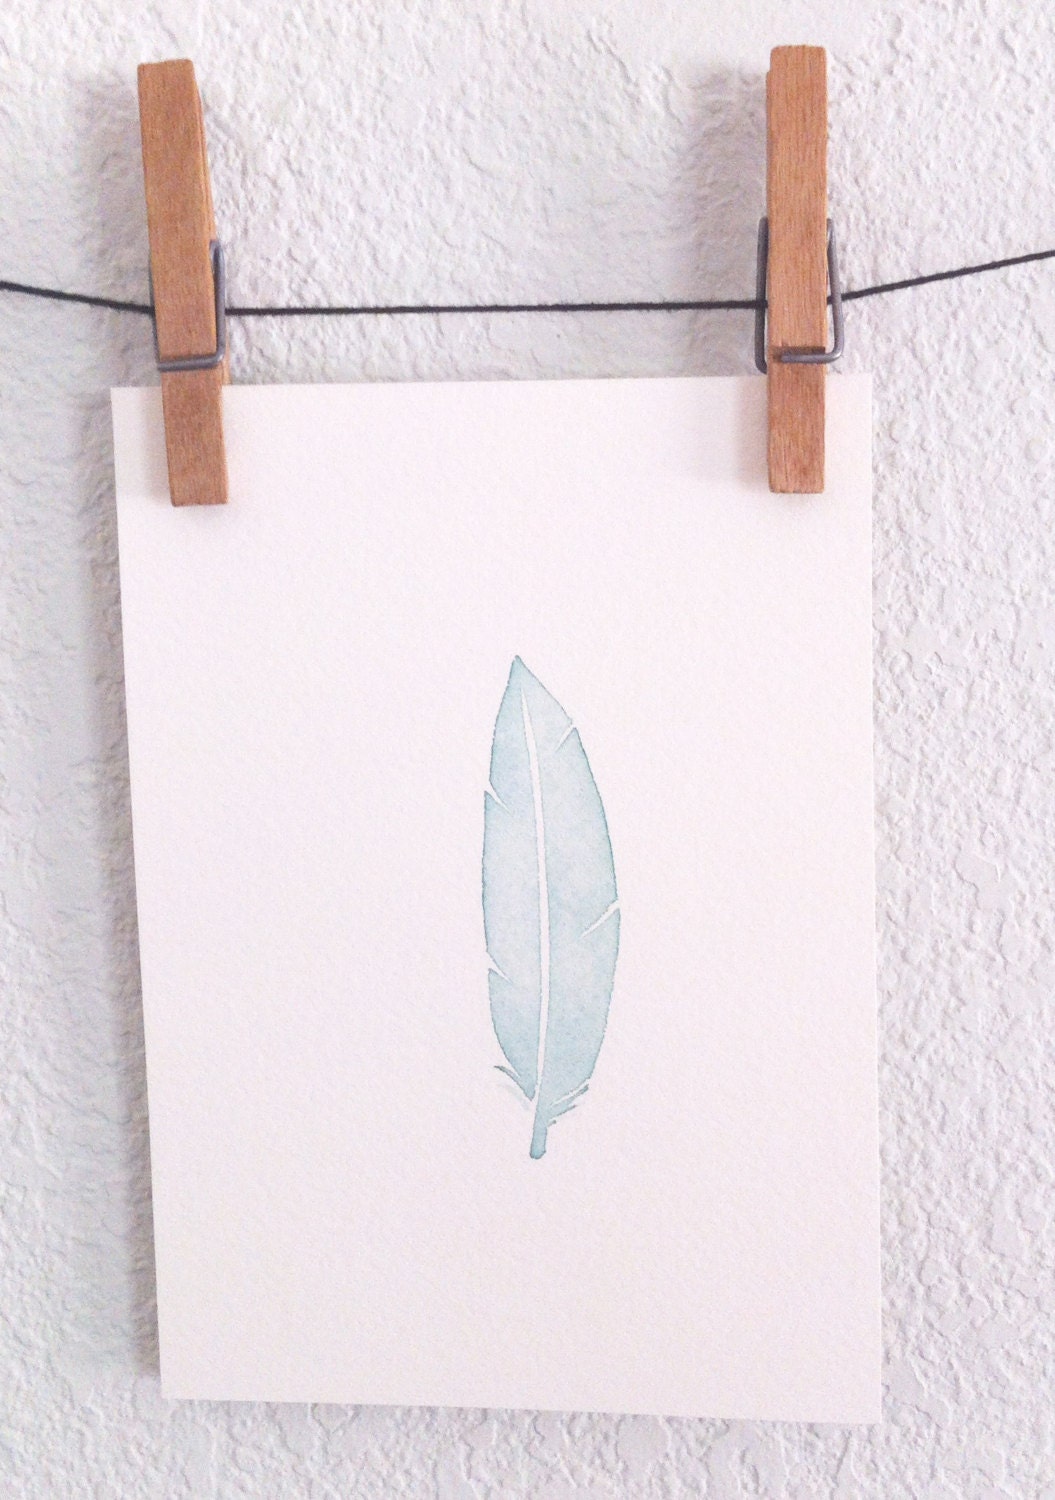 Mint Feather- Original 5x7 Watercolor painting